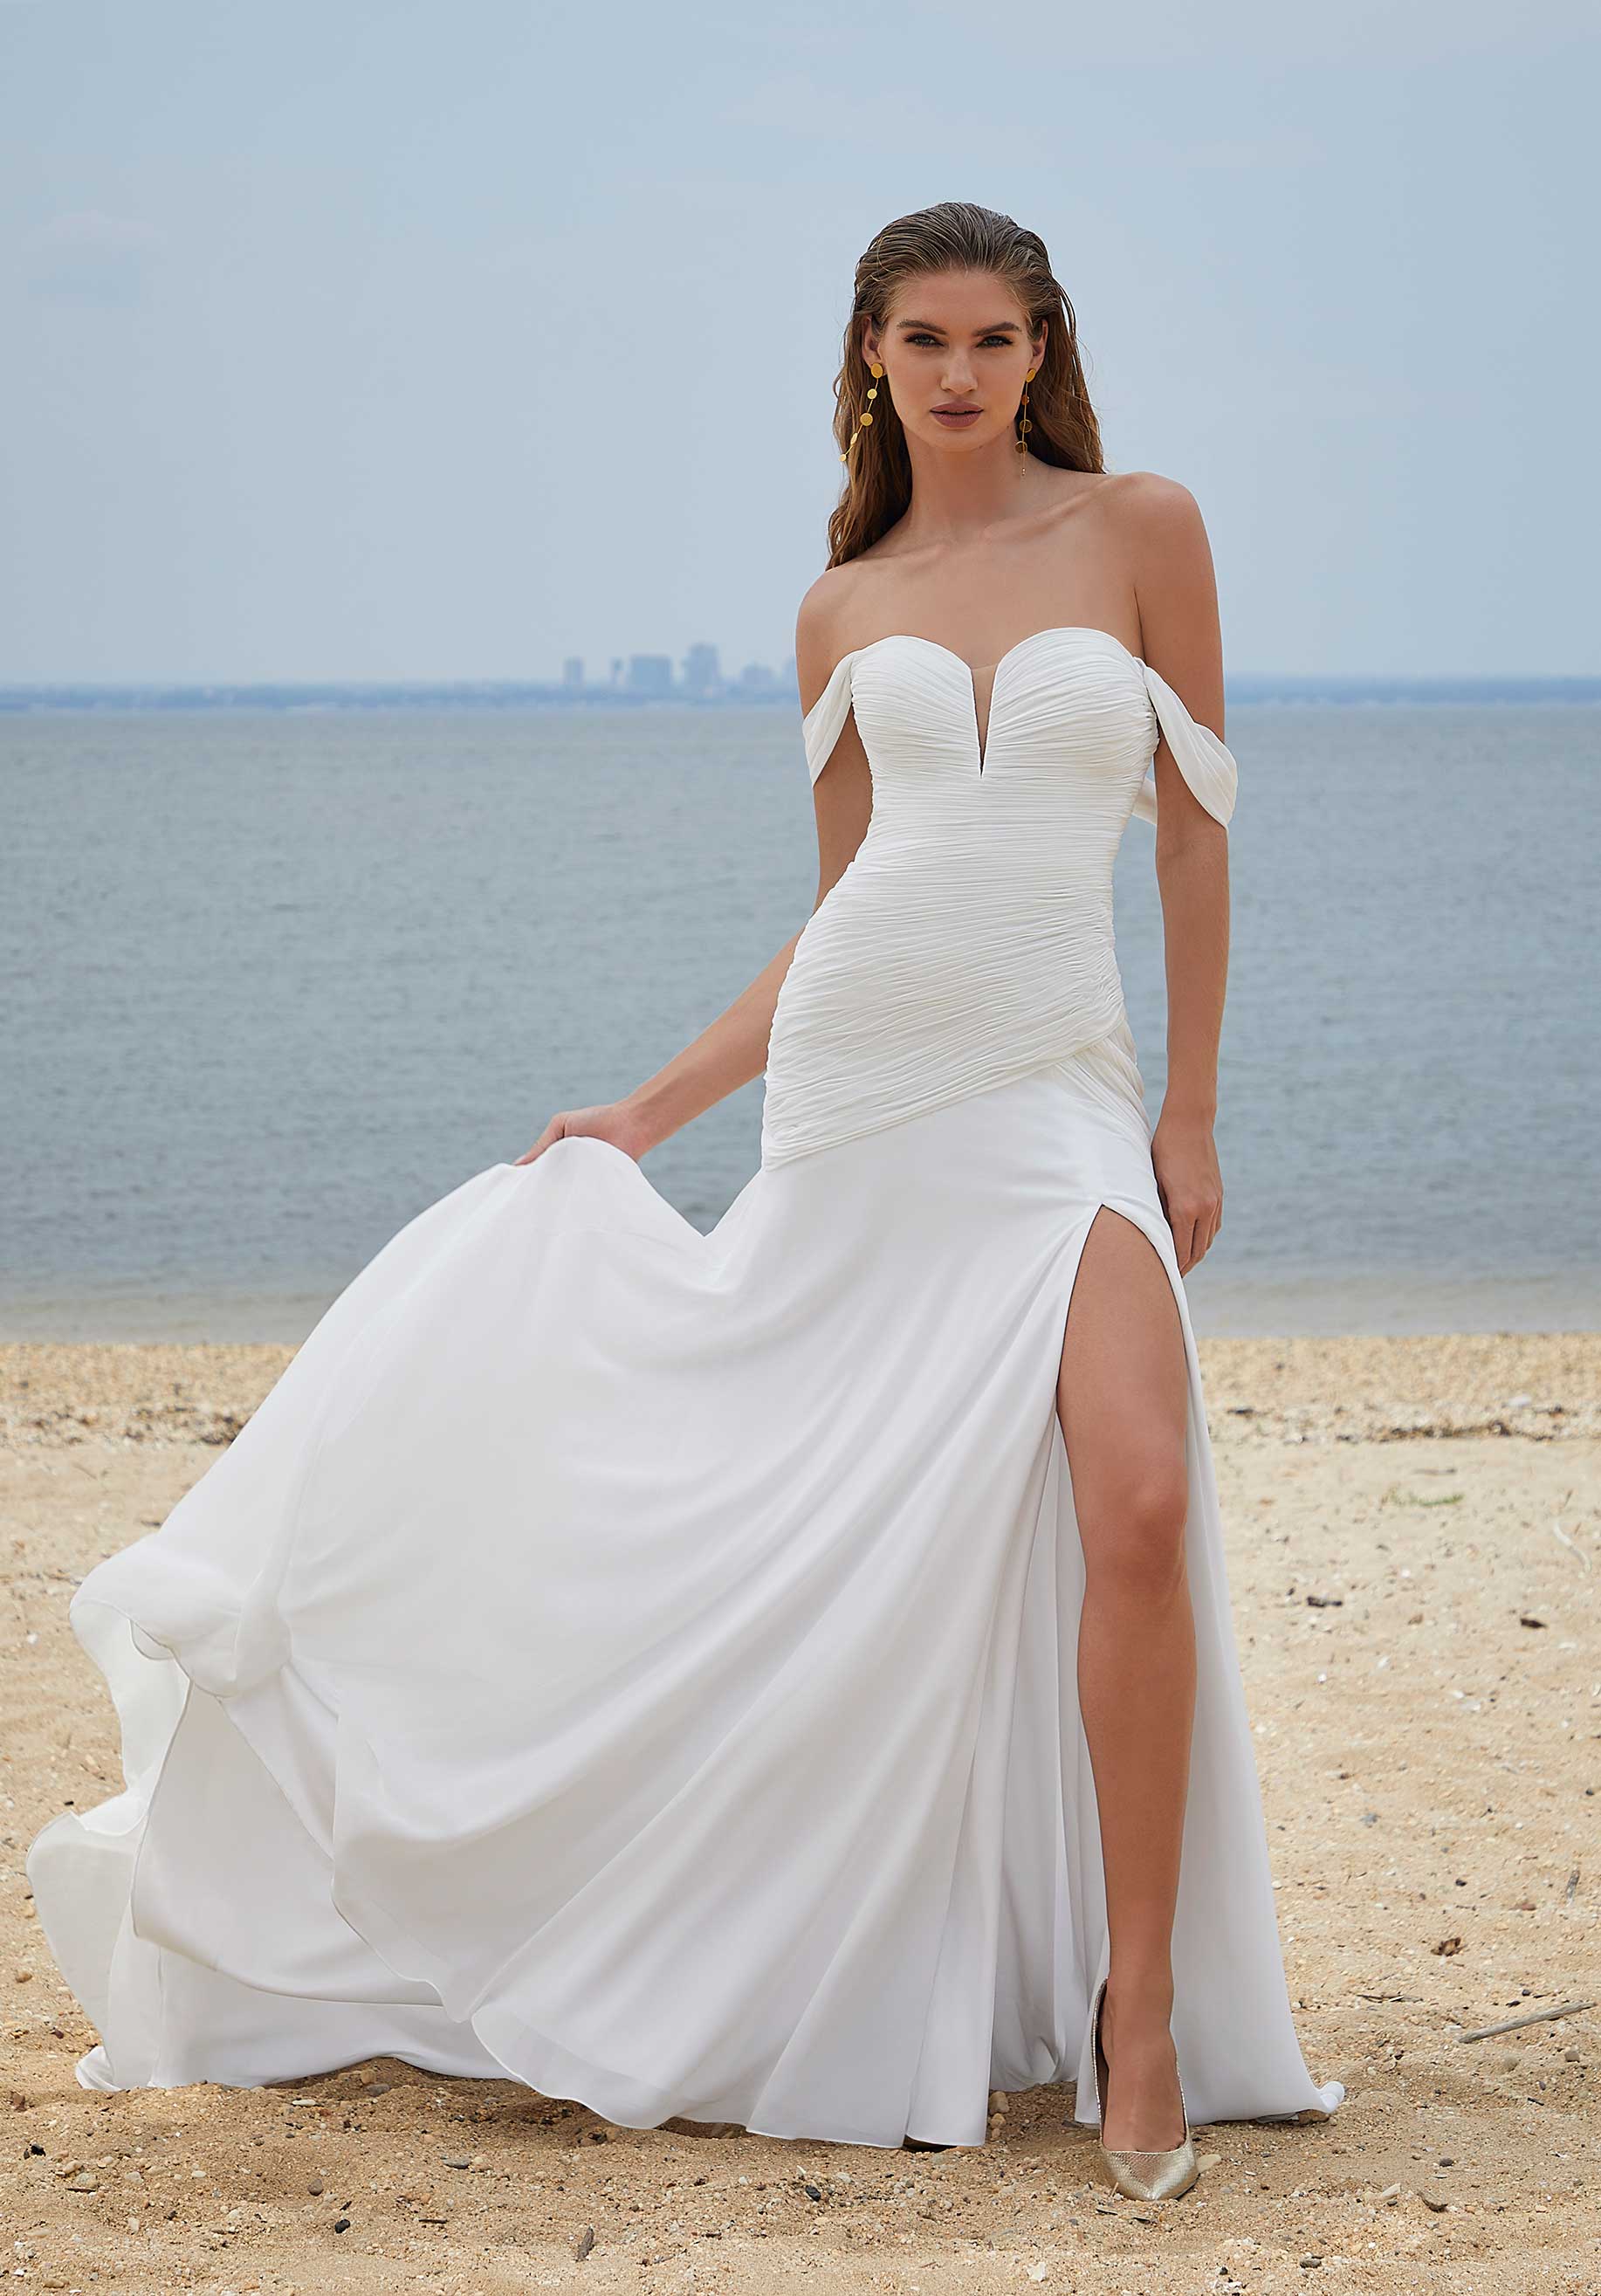 Best Wedding Dresses for Broad Shoulders  Bridal Gown Styles, Outfits for Wide  Shoulders